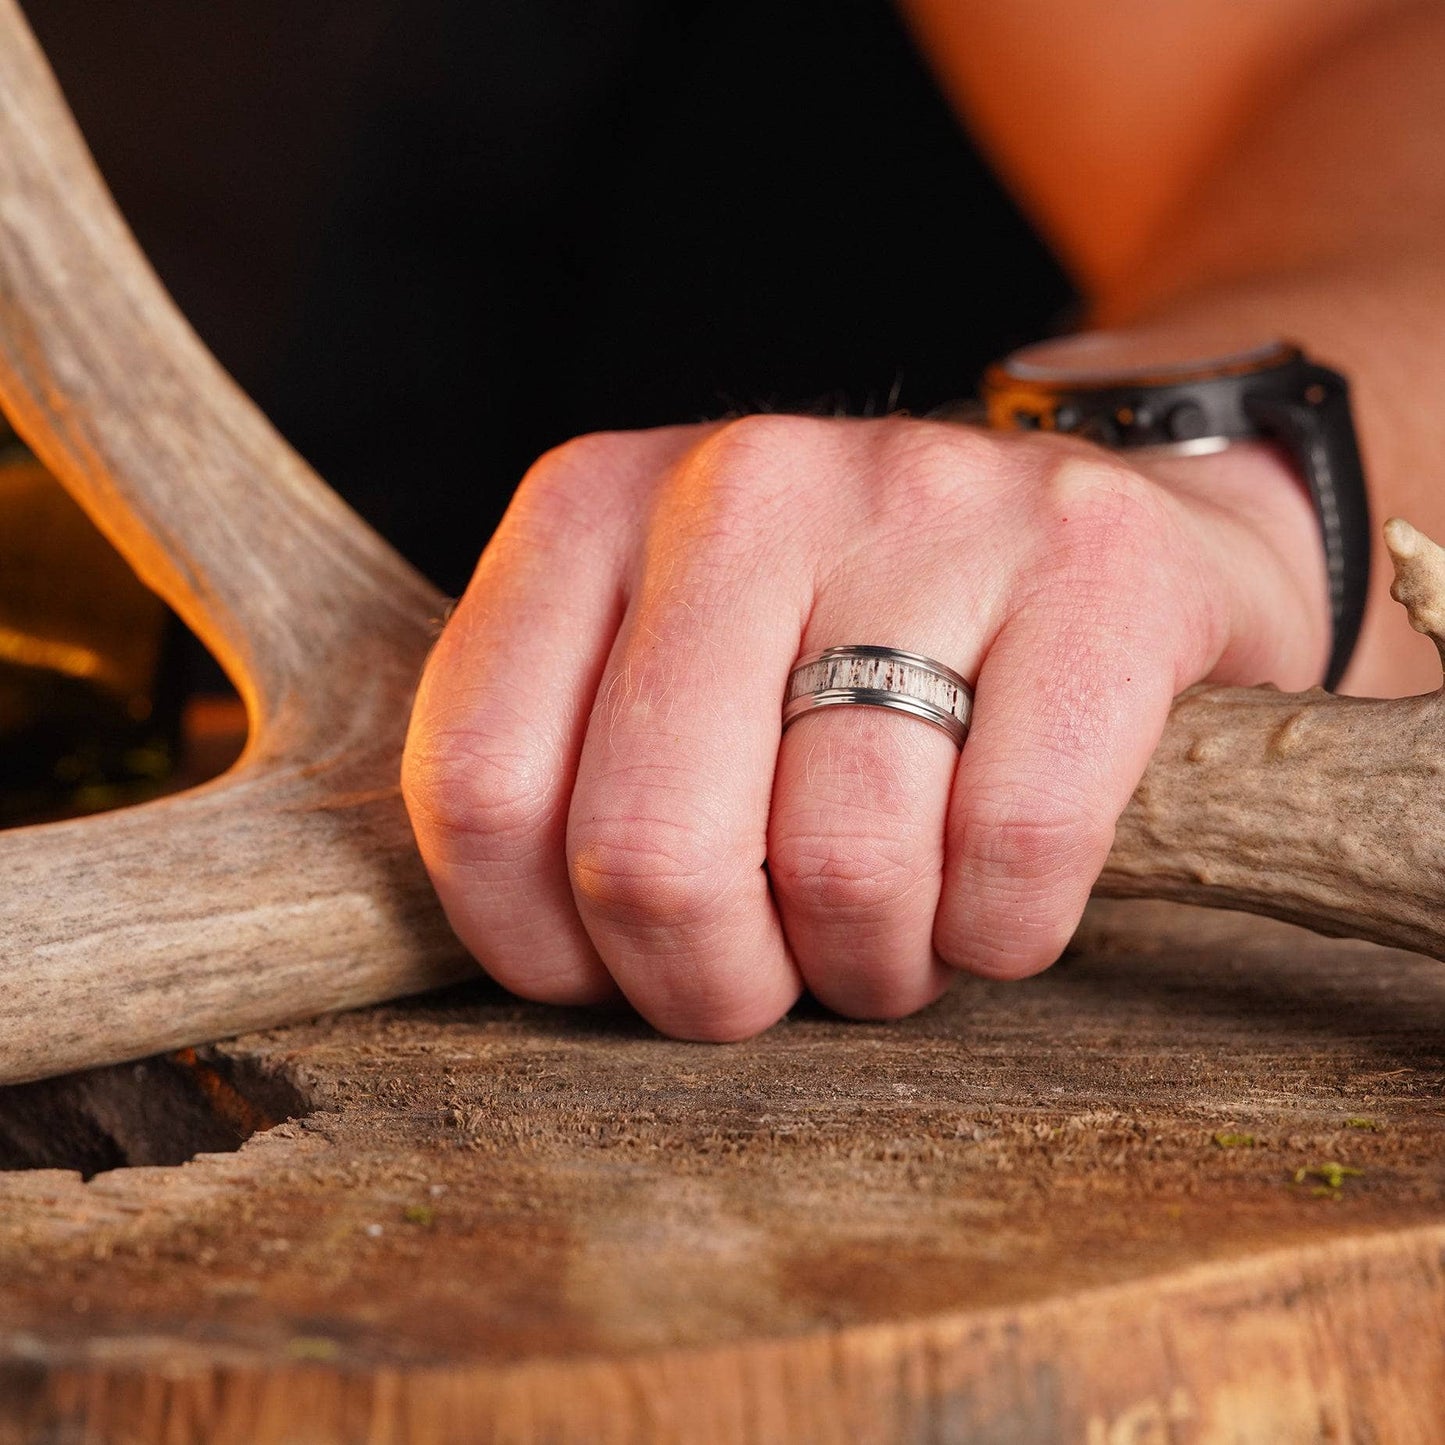 The Leif - Men's Wedding Rings - Manly Bands